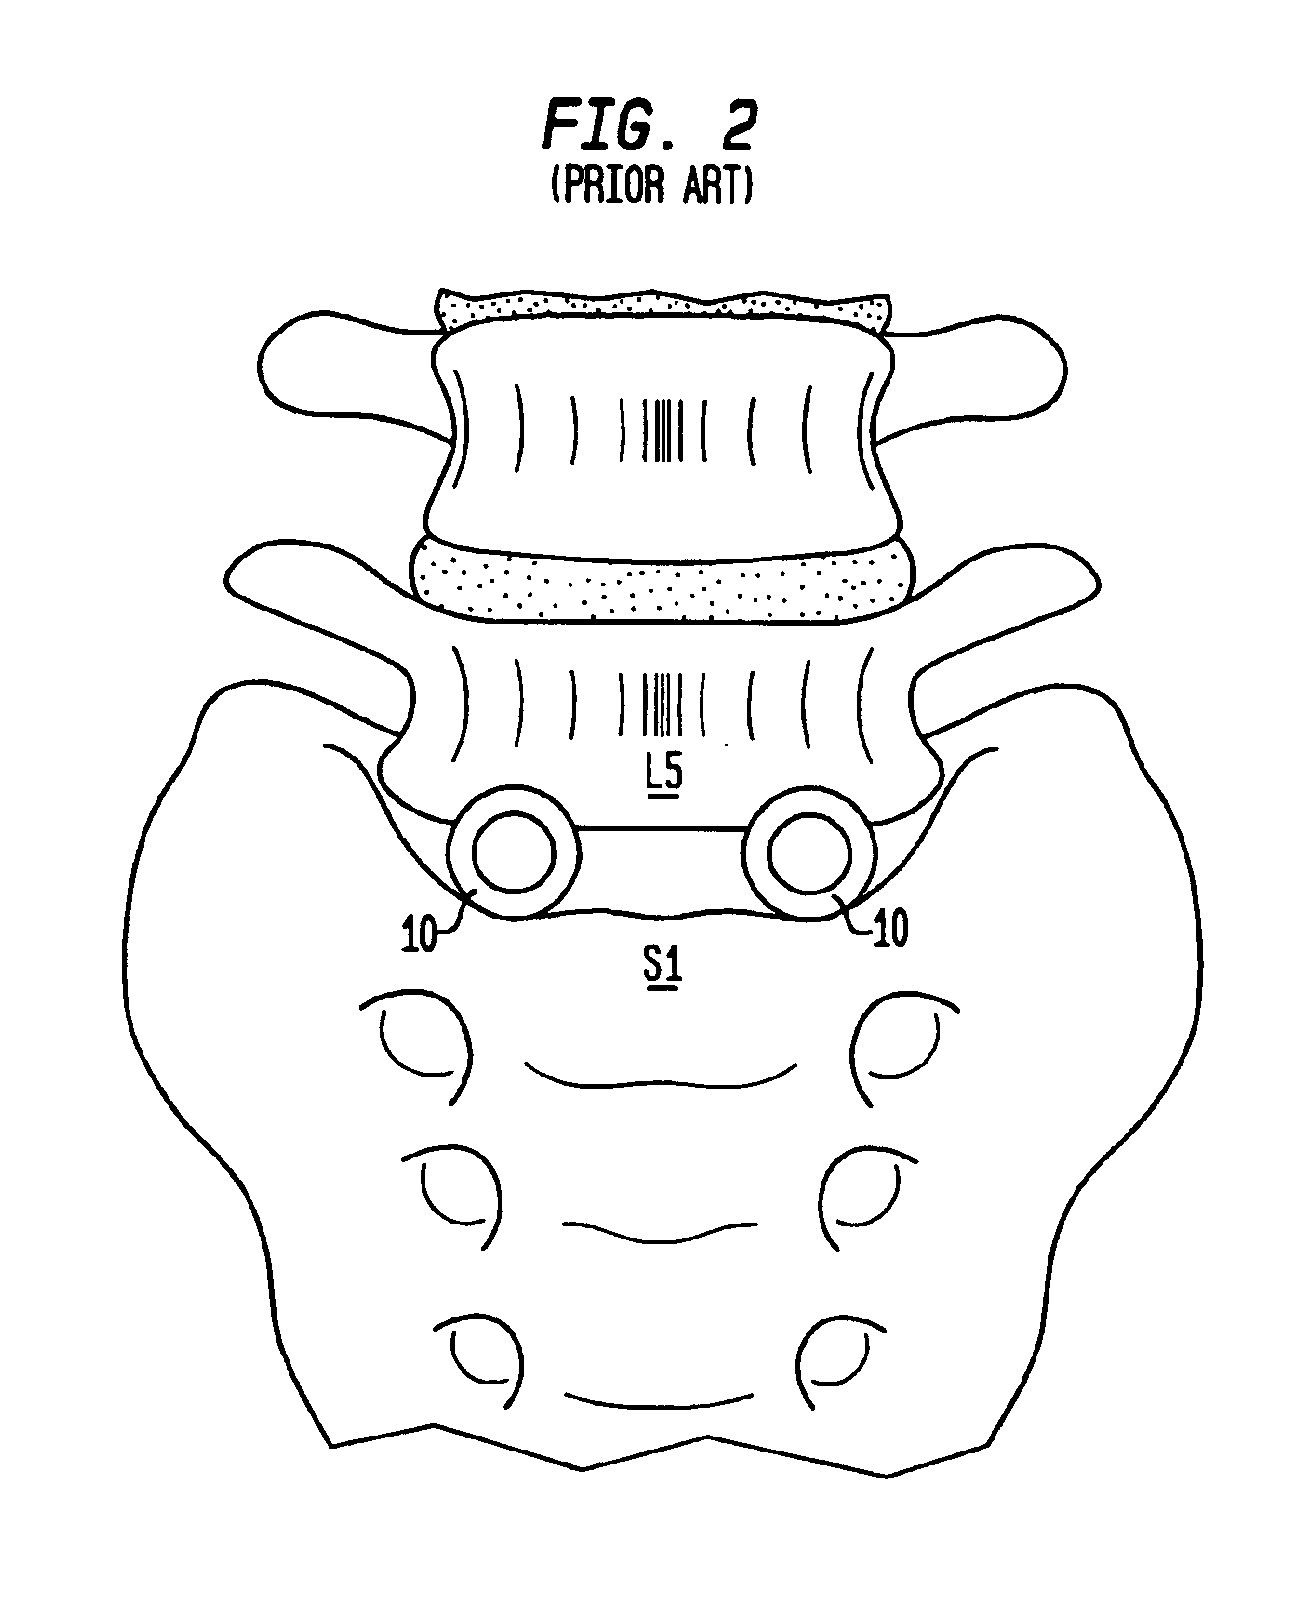 Intervertebral spacer device having a domed arch shaped spring